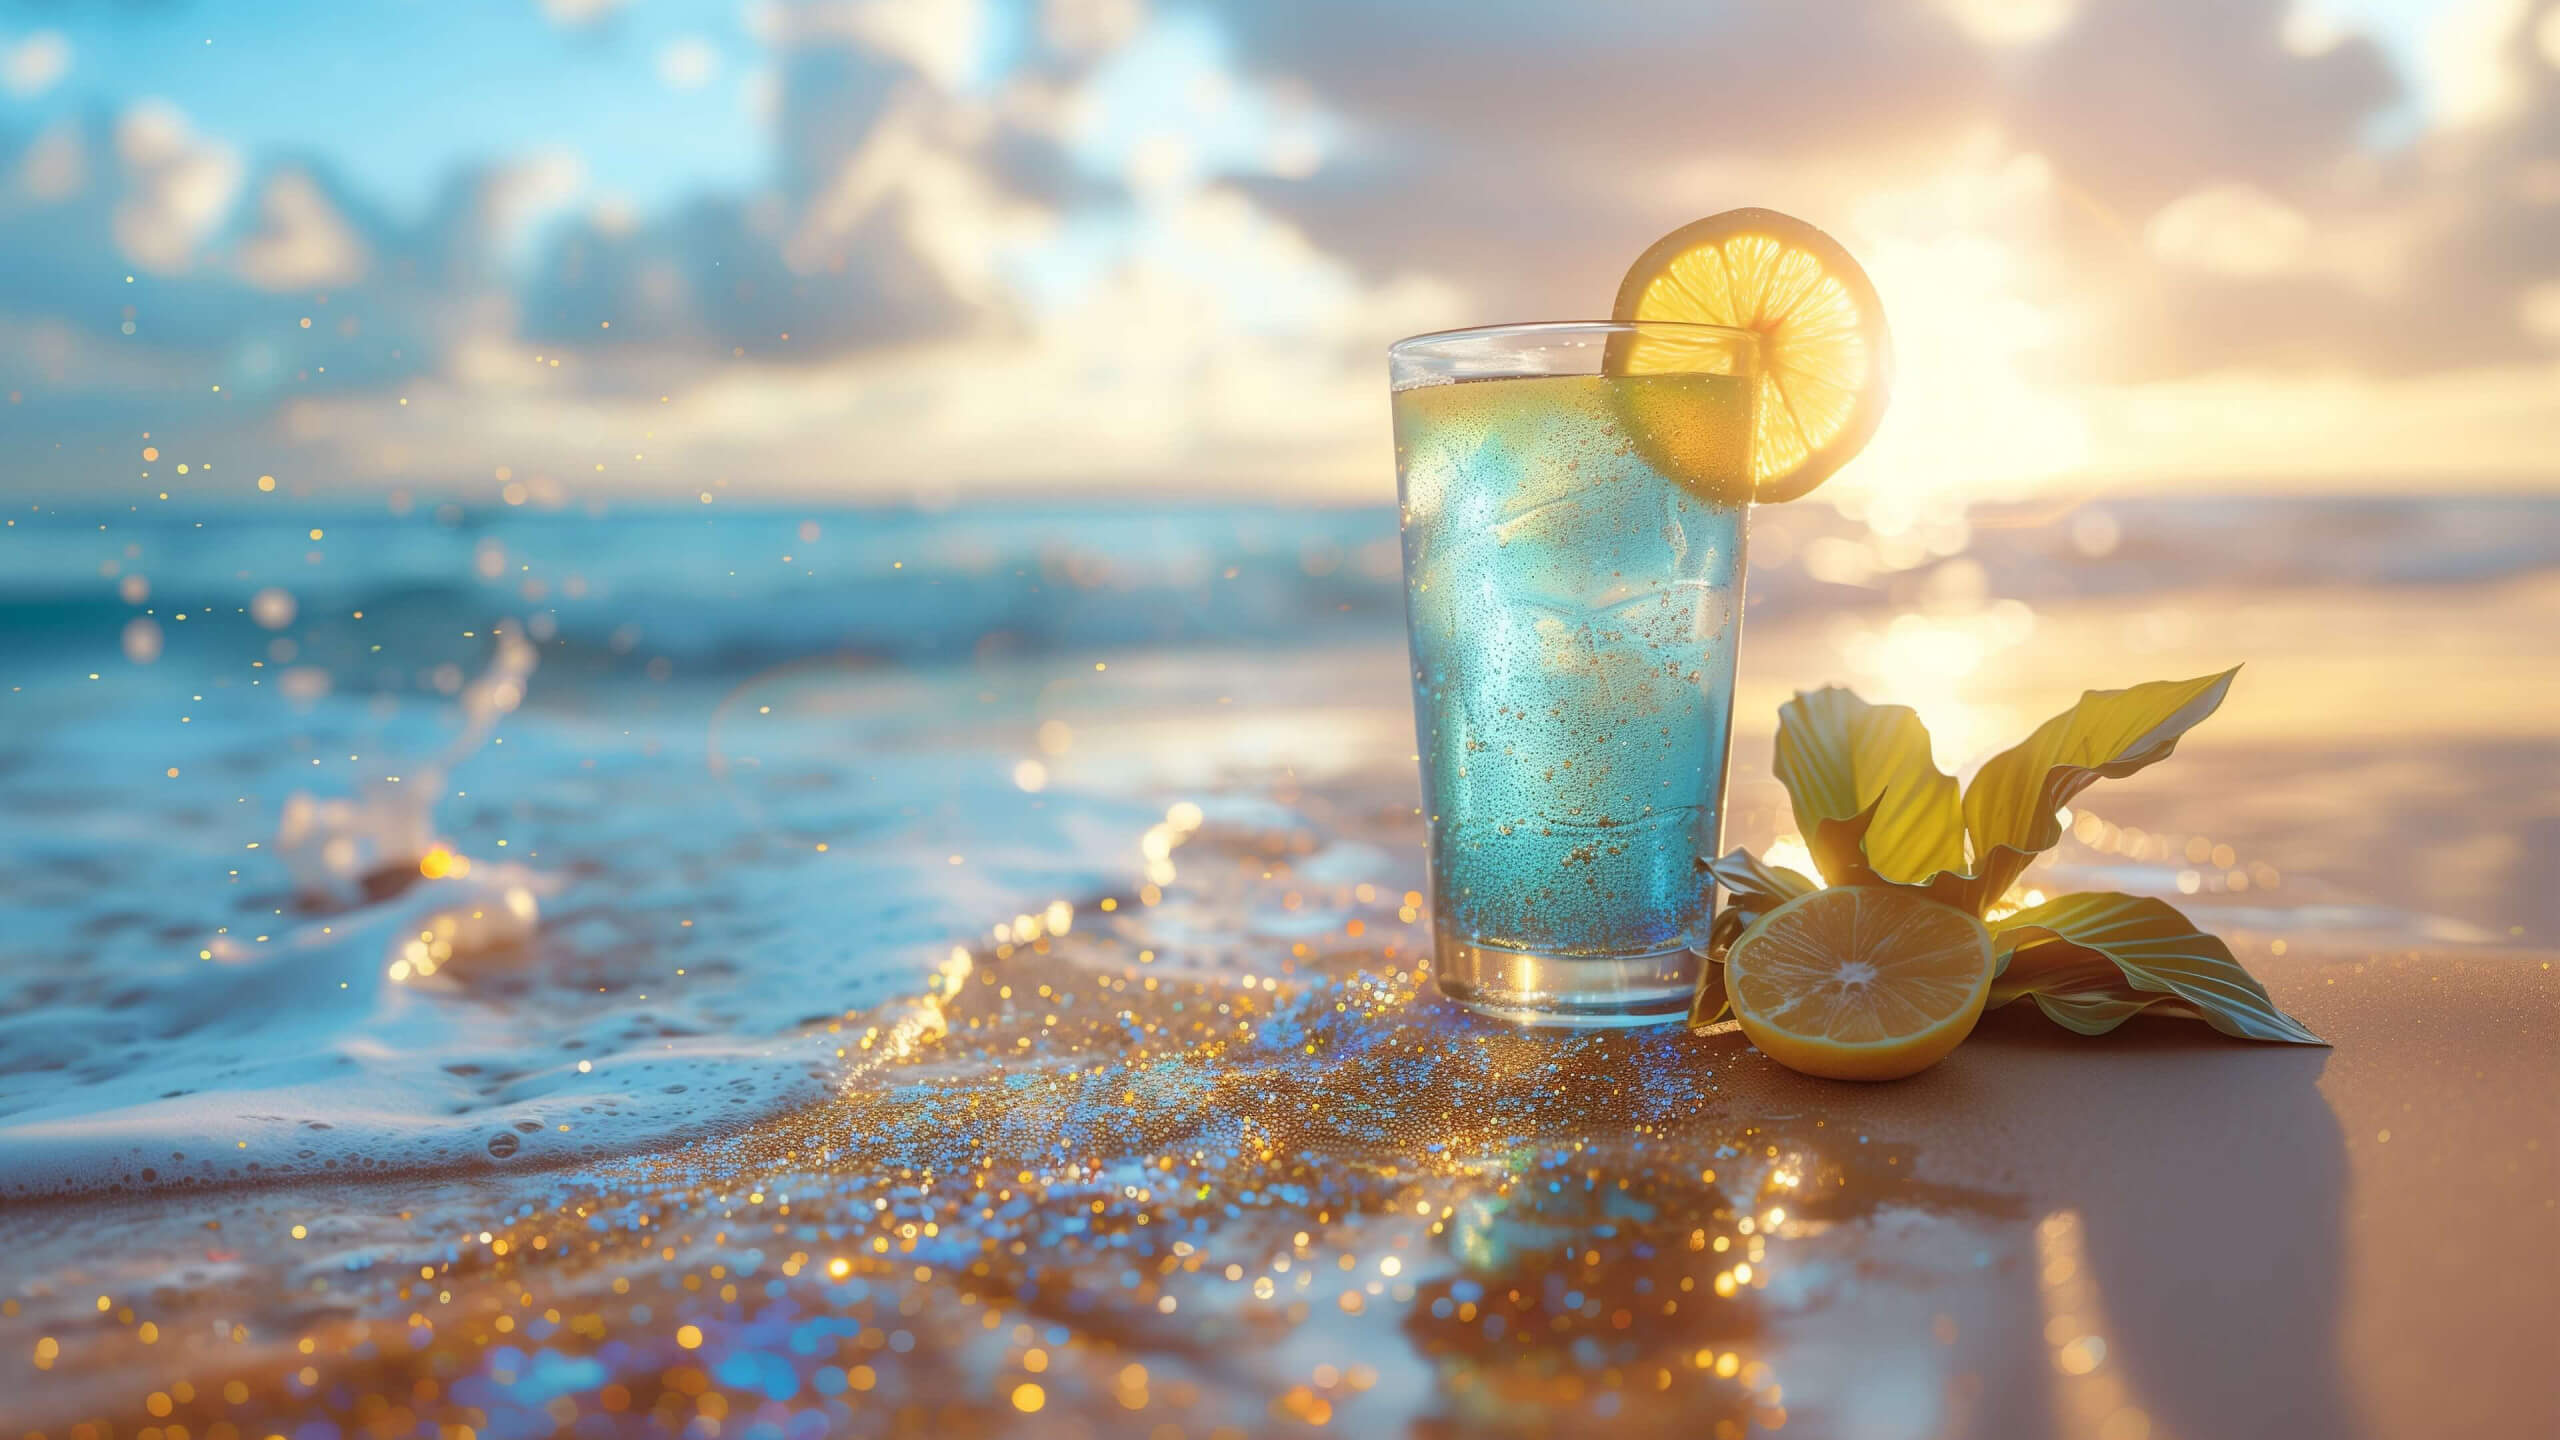 Cold drink on the ocean shore wallpaper 2560x1440